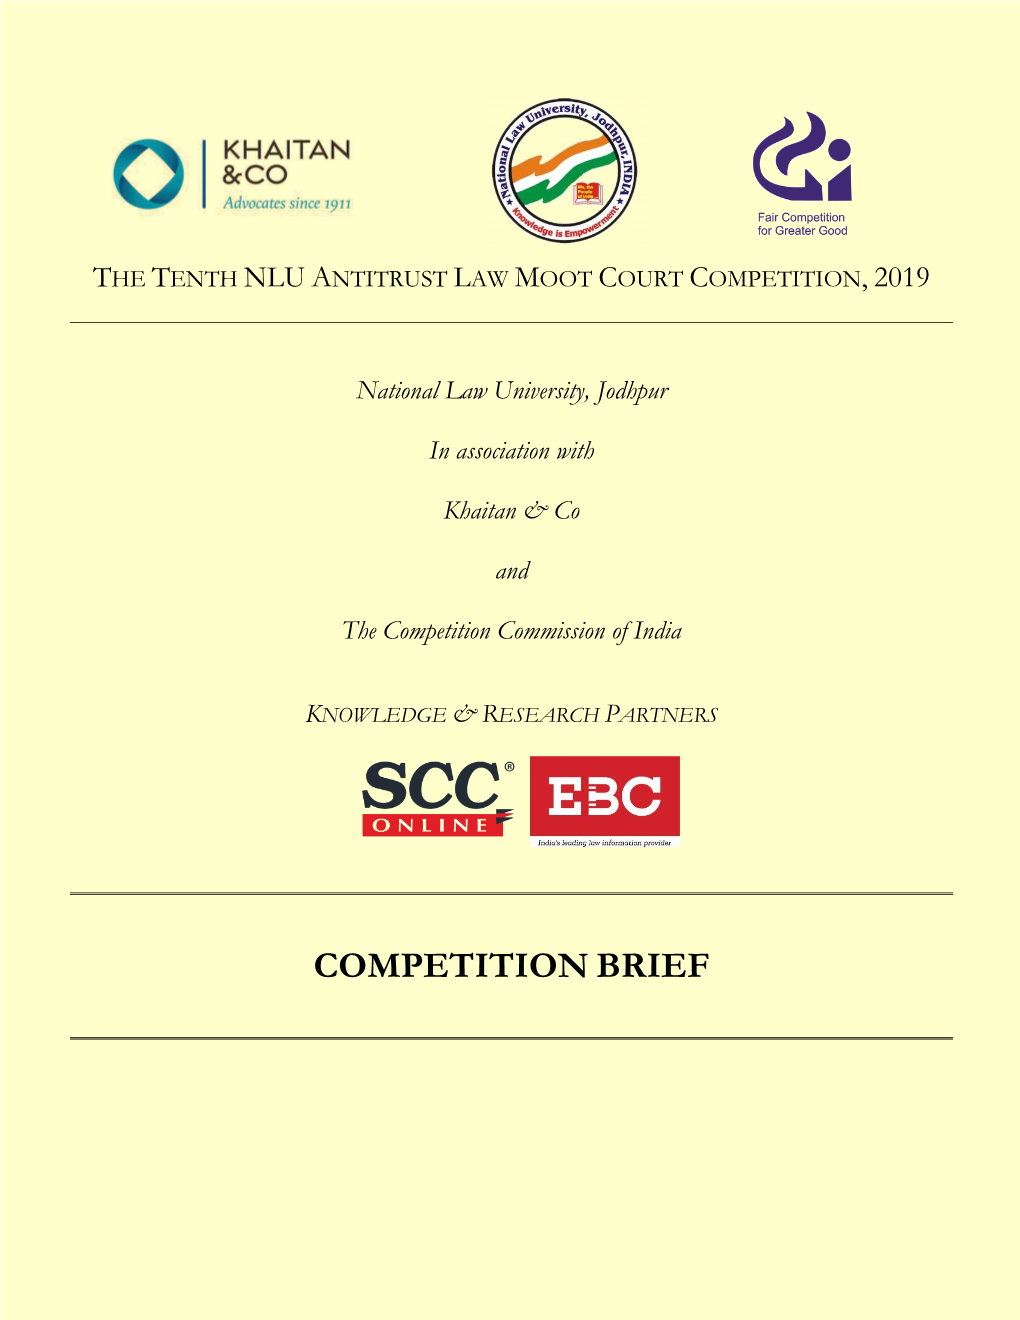 The Tenth Nlu Antitrust Law Moot Court Competition, 2019